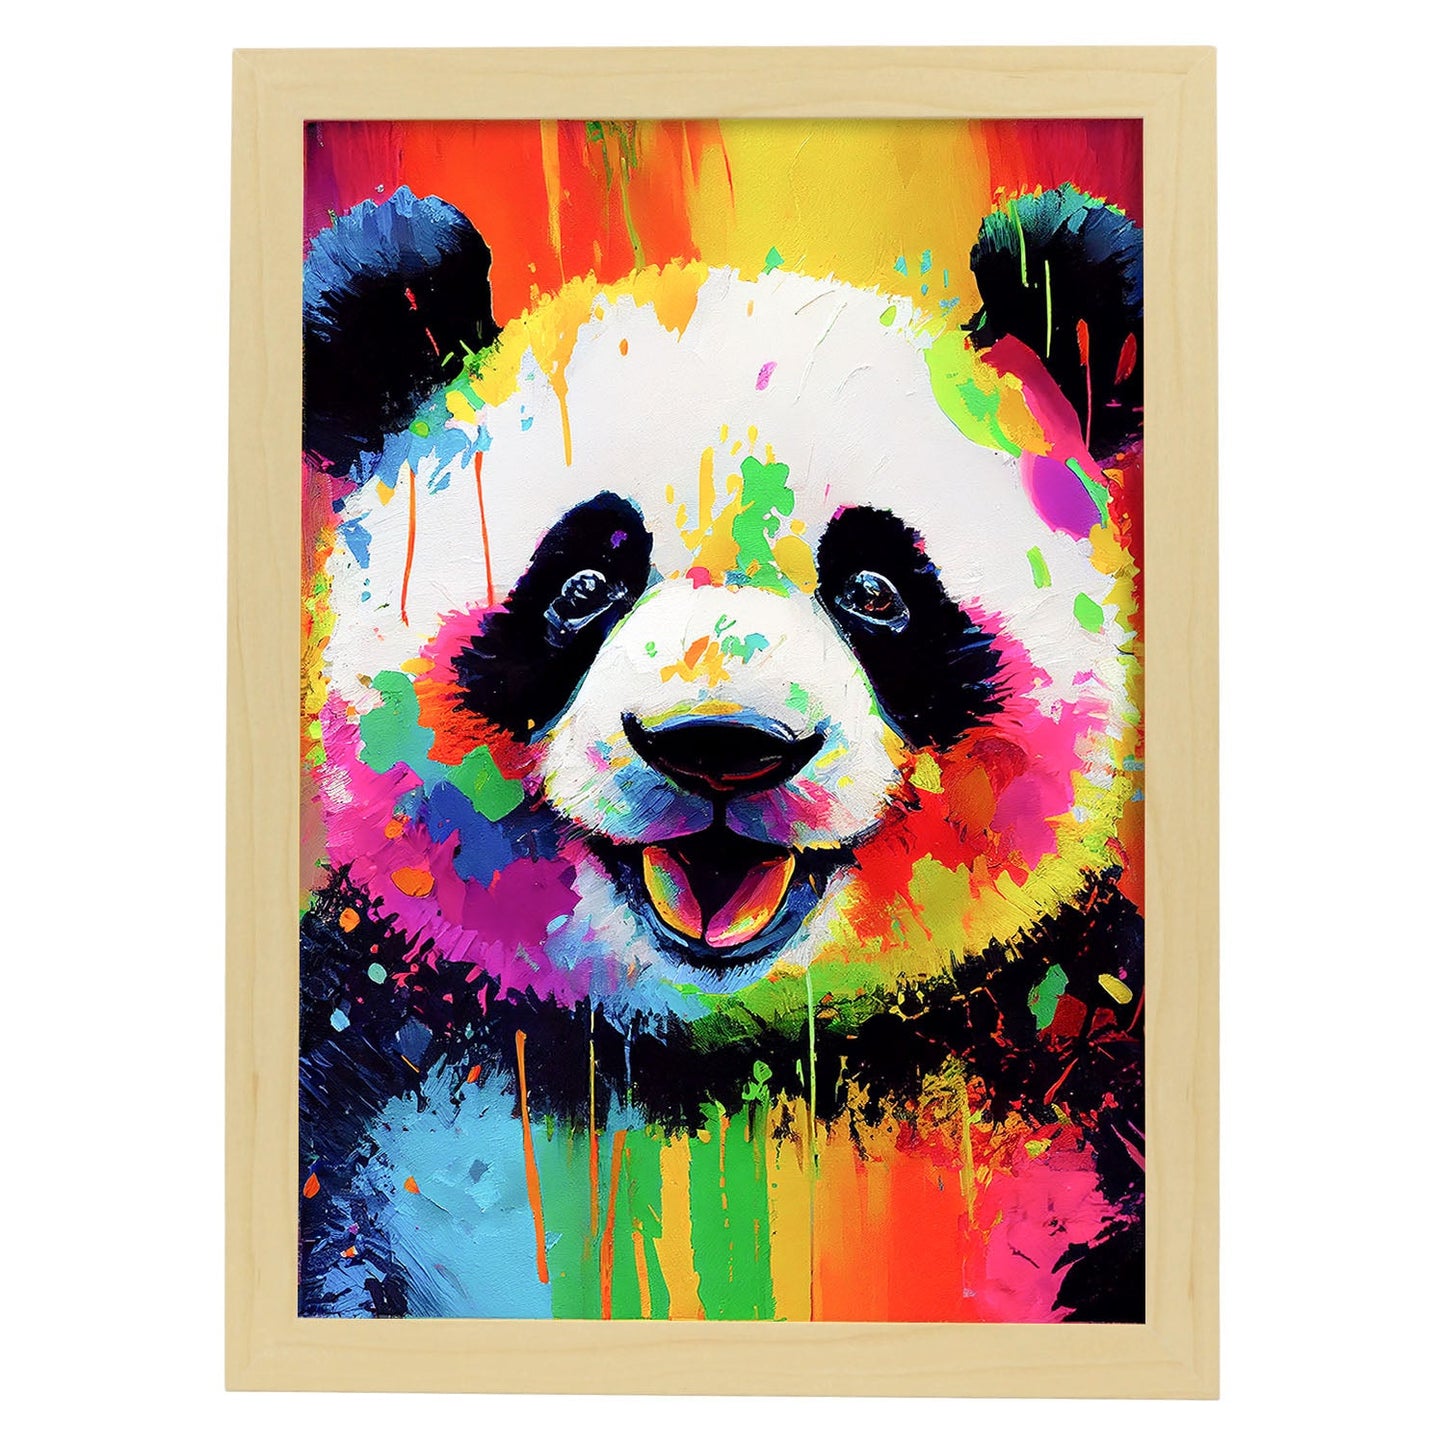 Nacnic Abstract smiling Panda in Lisa Fran Style_1. Aesthetic Wall Art Prints for Bedroom or Living Room Design.